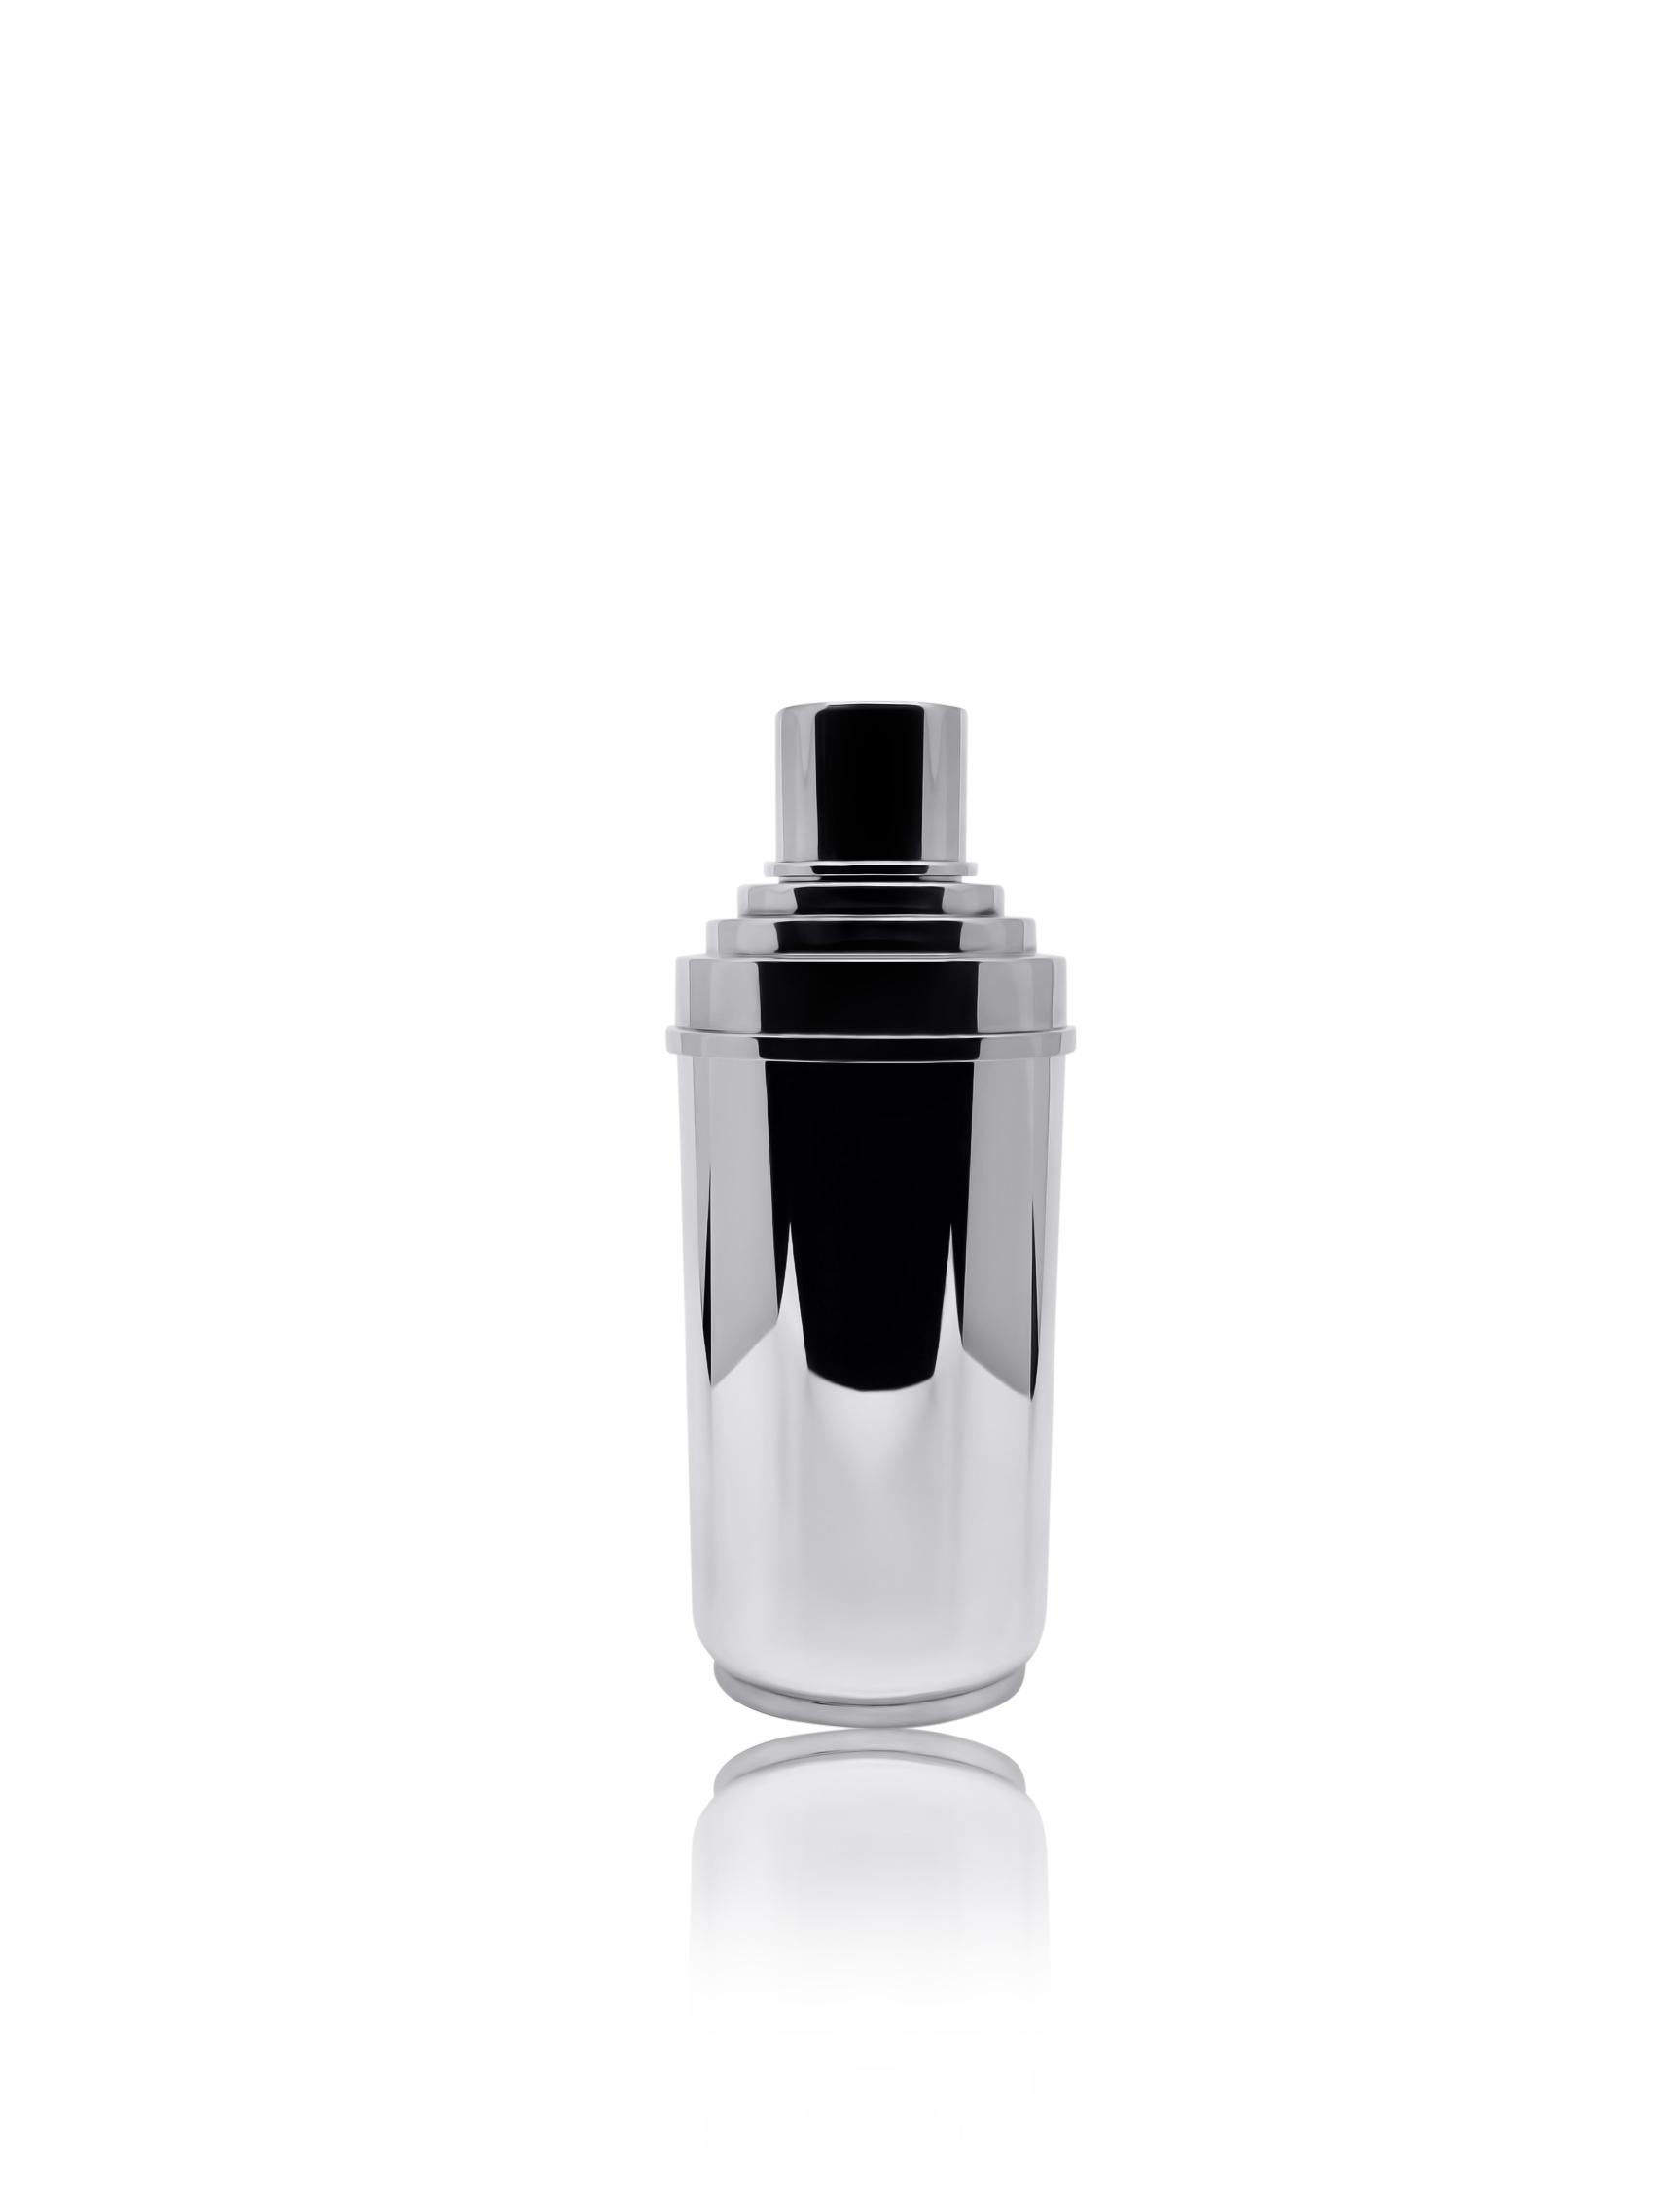 A Danish sterling silver cocktail shaker designed and meticulously crafted by Erik Sjødahl (Sjodahl), renowned as one of Denmark’s finest silversmiths and designers. The cocktail shaker is composed of three parts. The vessel features a ring foot and